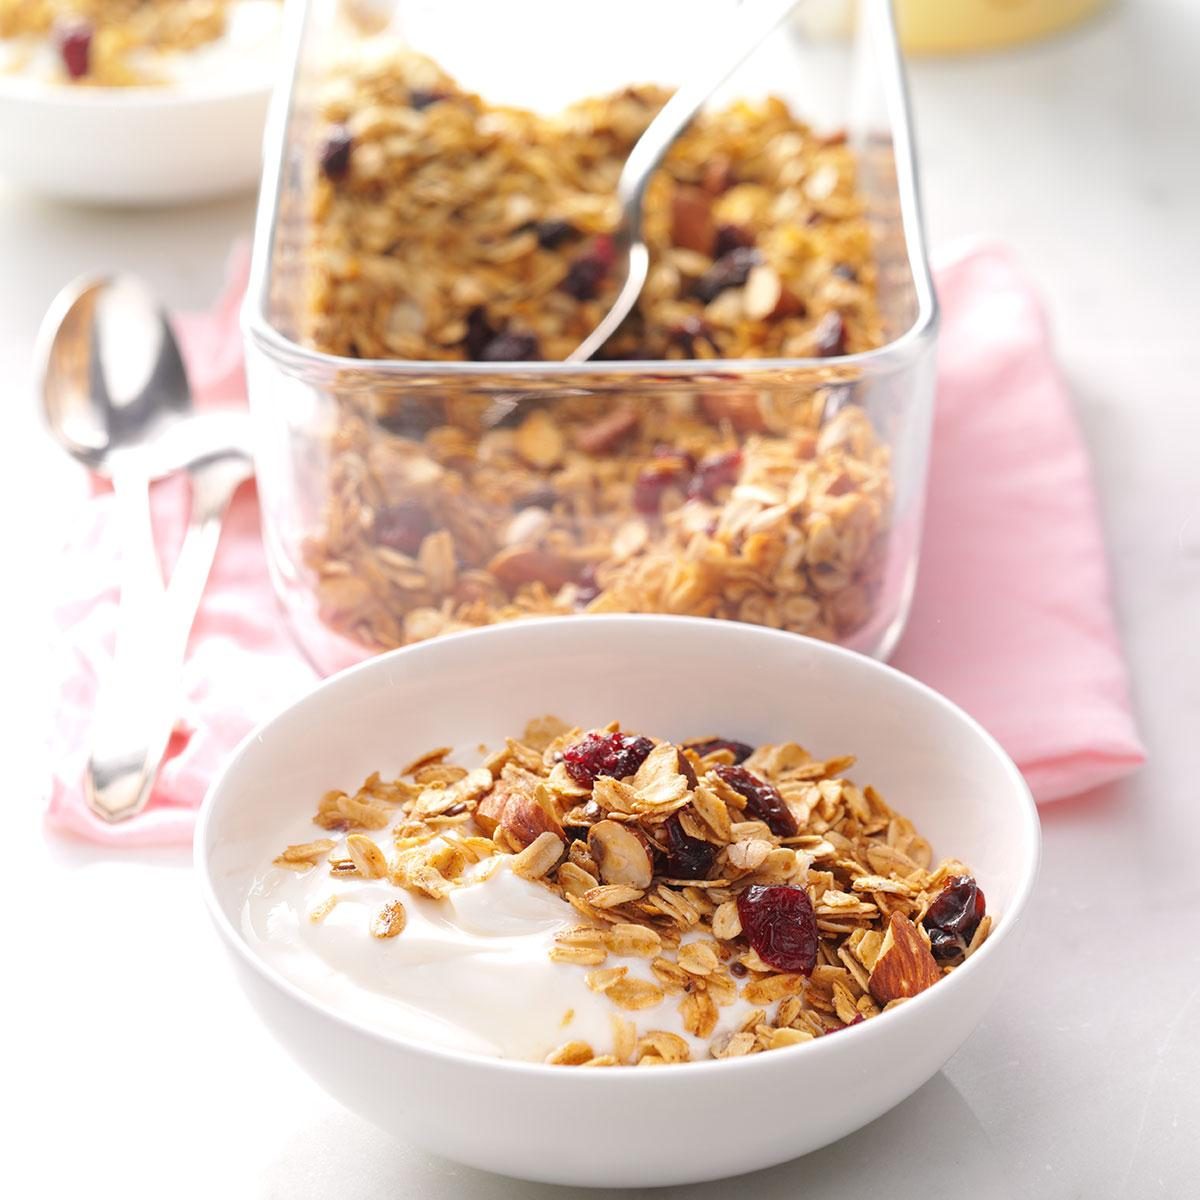 Get-Up-and-Go Granola